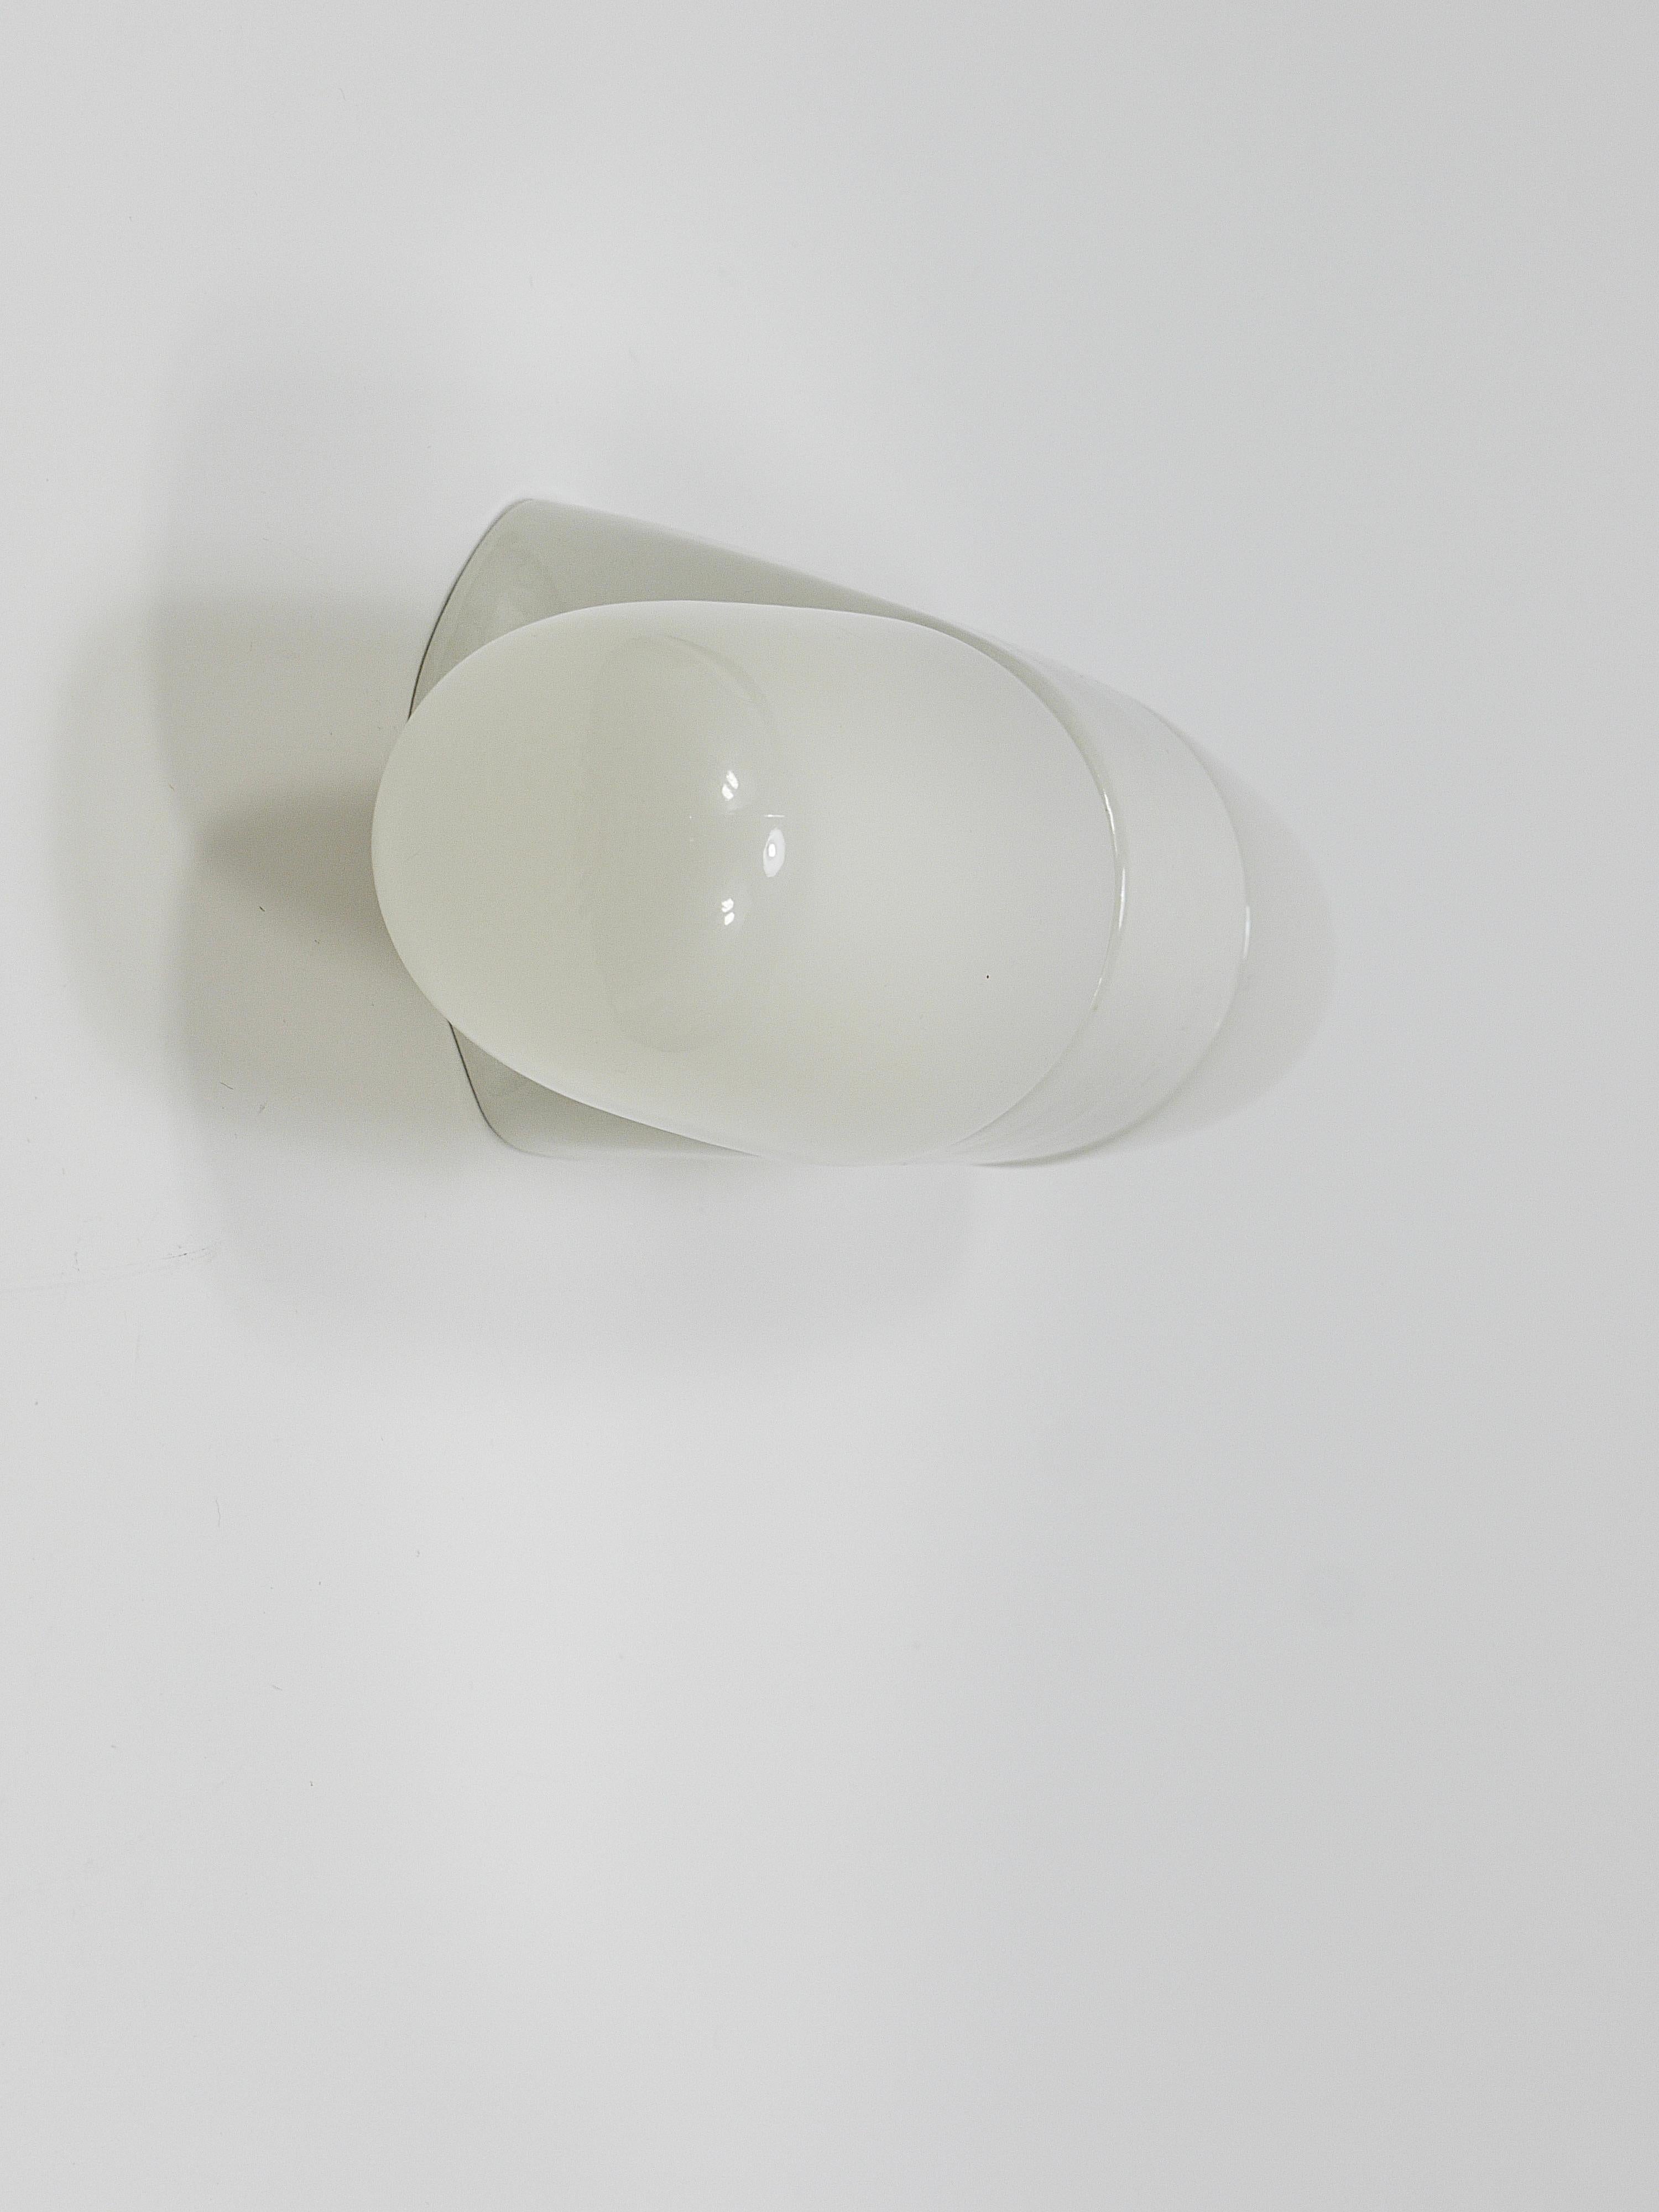 Wilhelm Wagenfeld Bauhaus Sconce / Double Wall Light by Linder Germany, 1950s For Sale 2